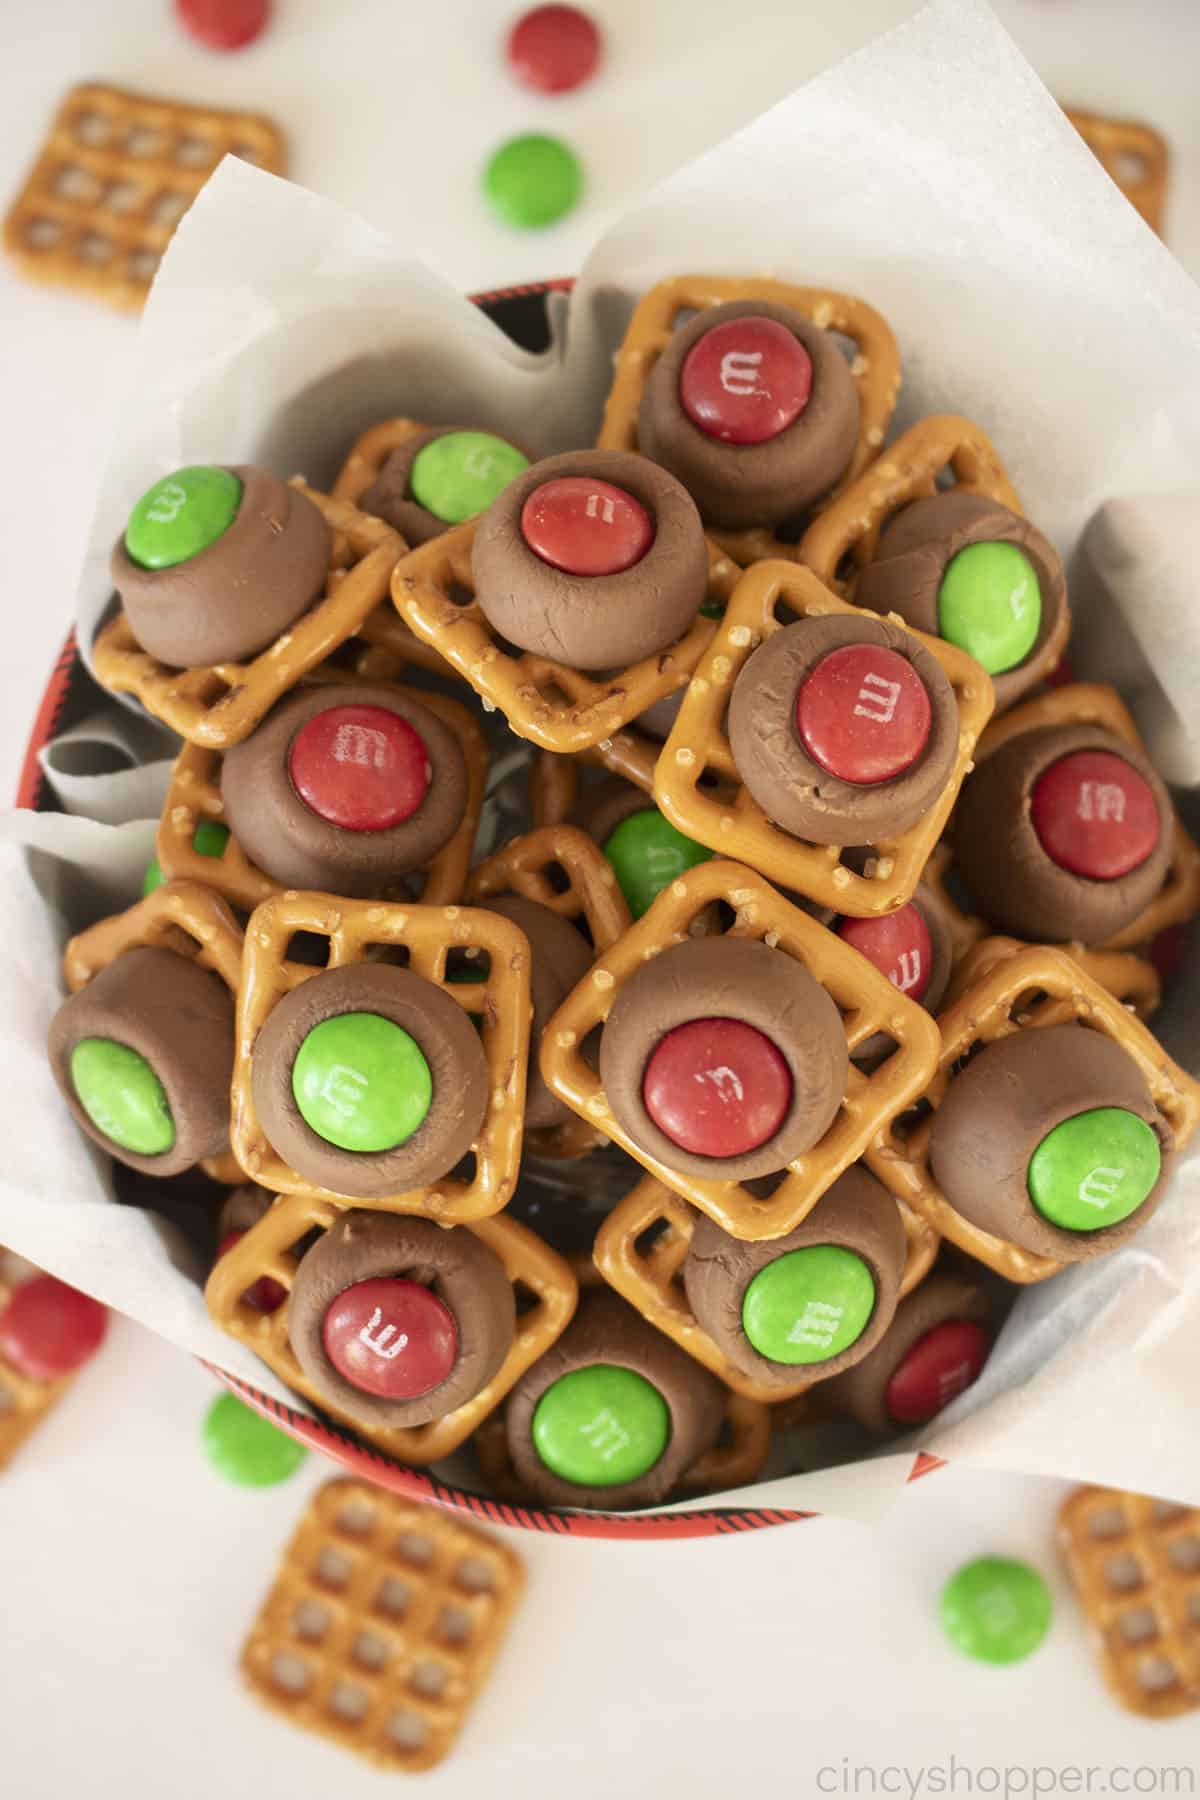 In close on Hershey Kiss pretzels with red and green M&M's.